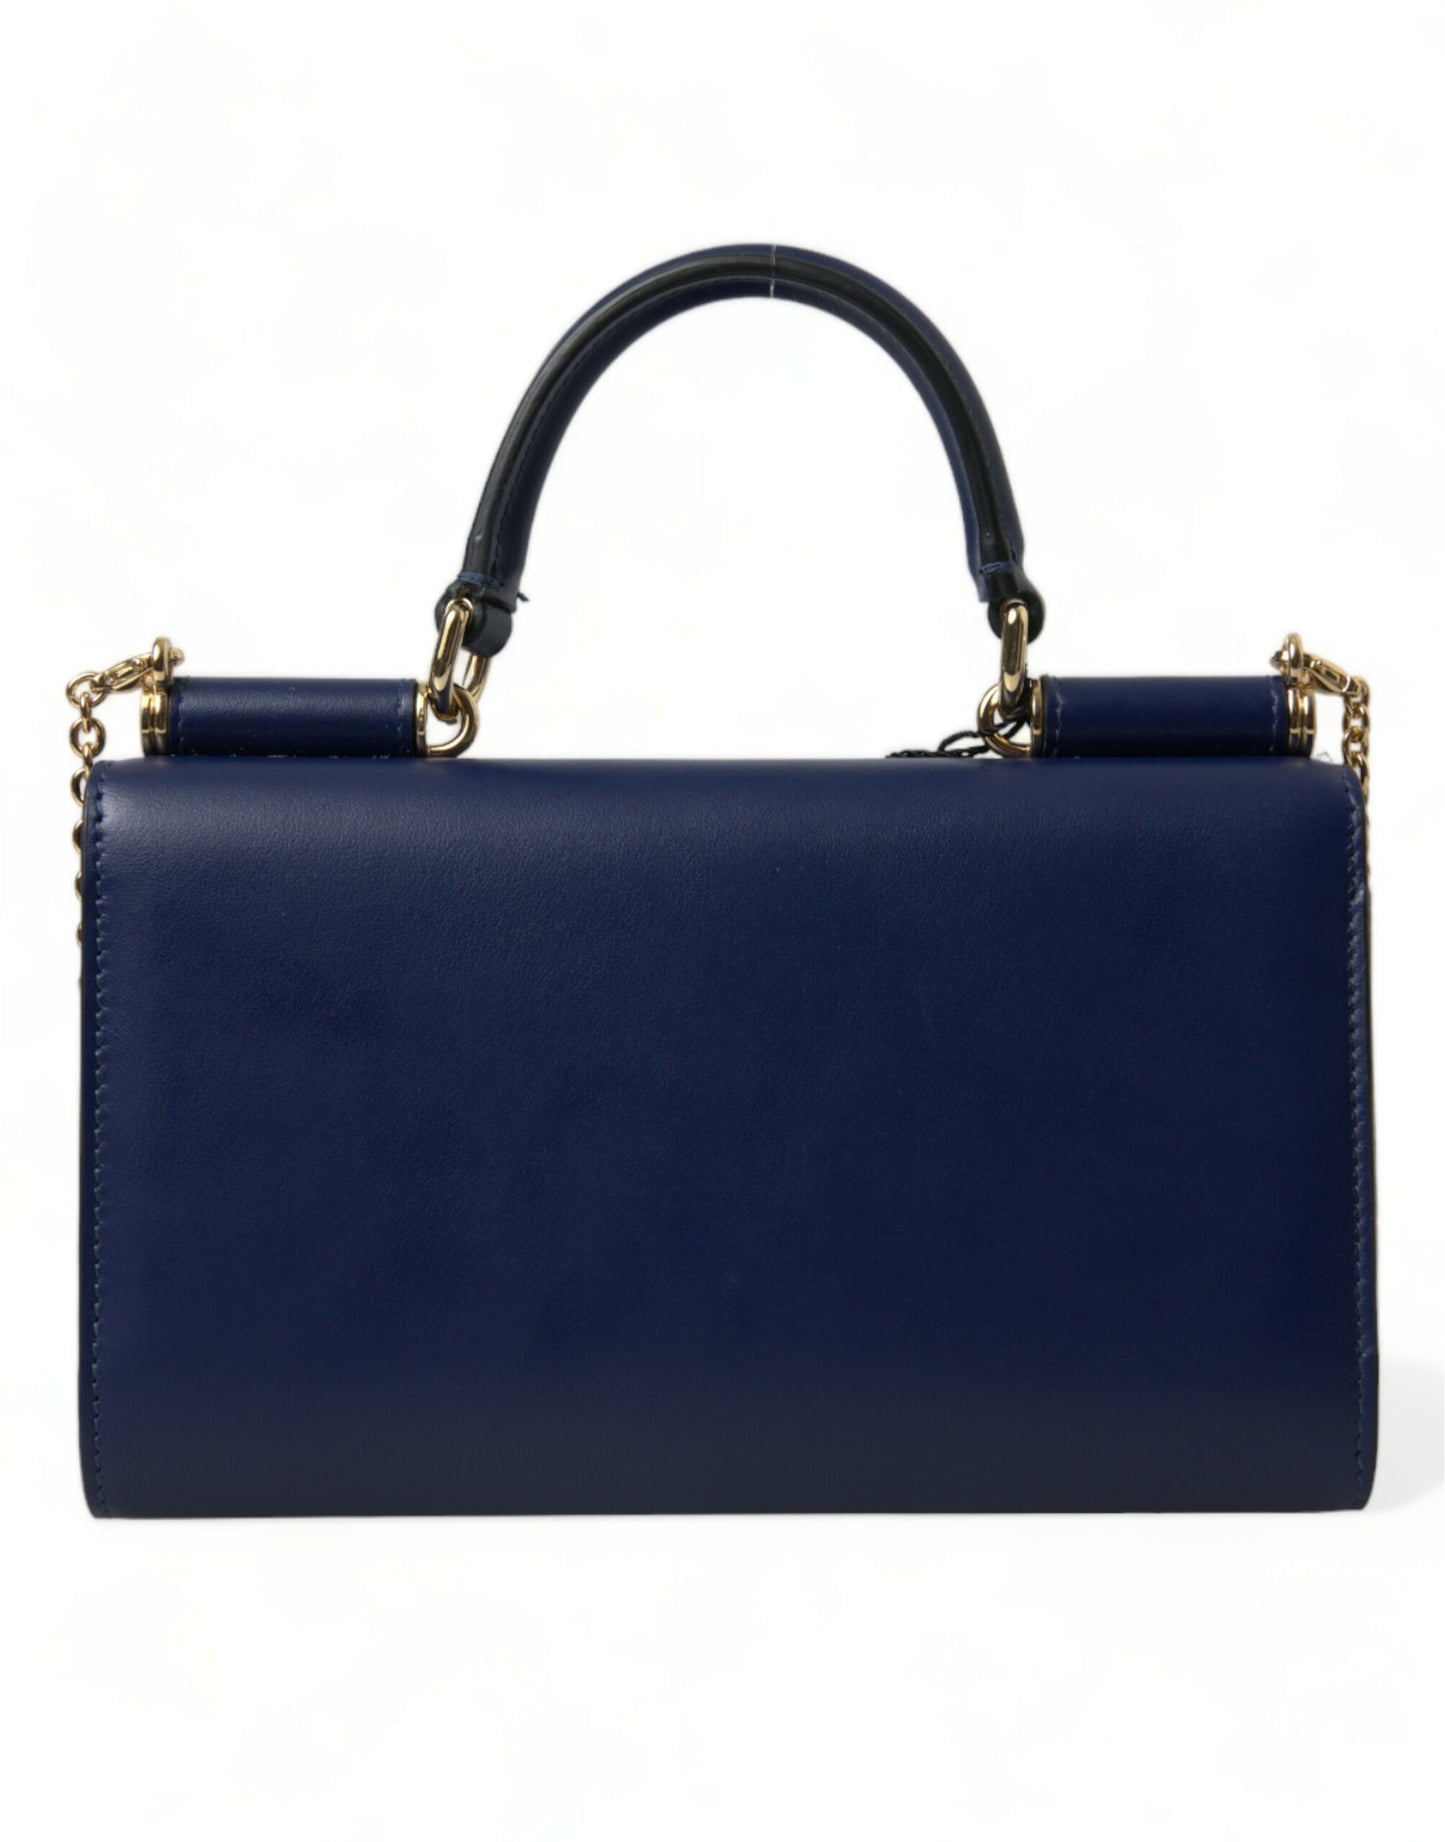 Elegant Blue Leather Phone Bag with Gold Accents